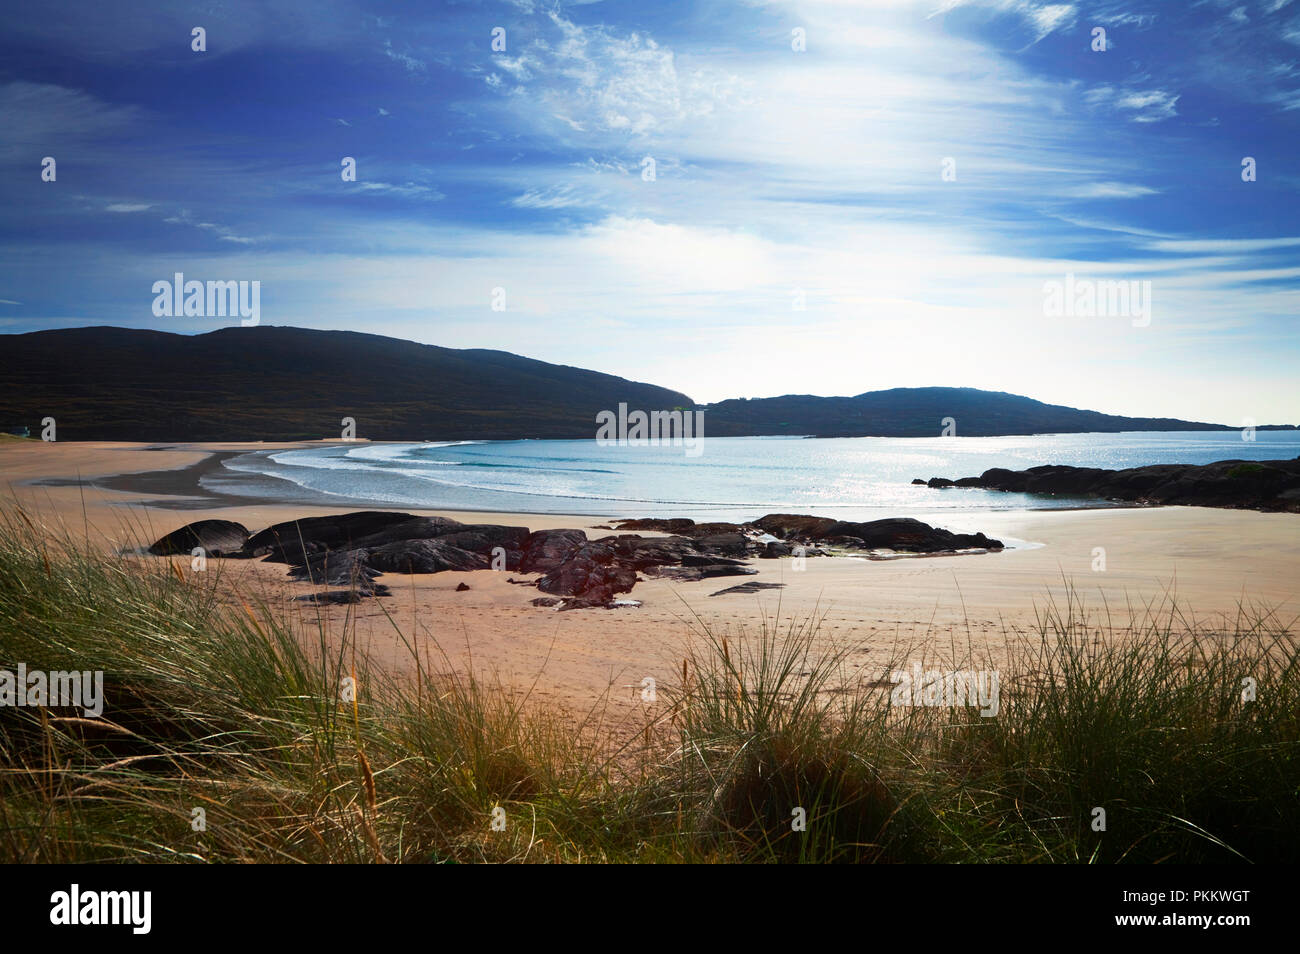 Derrynane Bay near Danial O'Connell's Derrynane House, The Ring of Kerry, County Kerry, Ireland Stock Photo